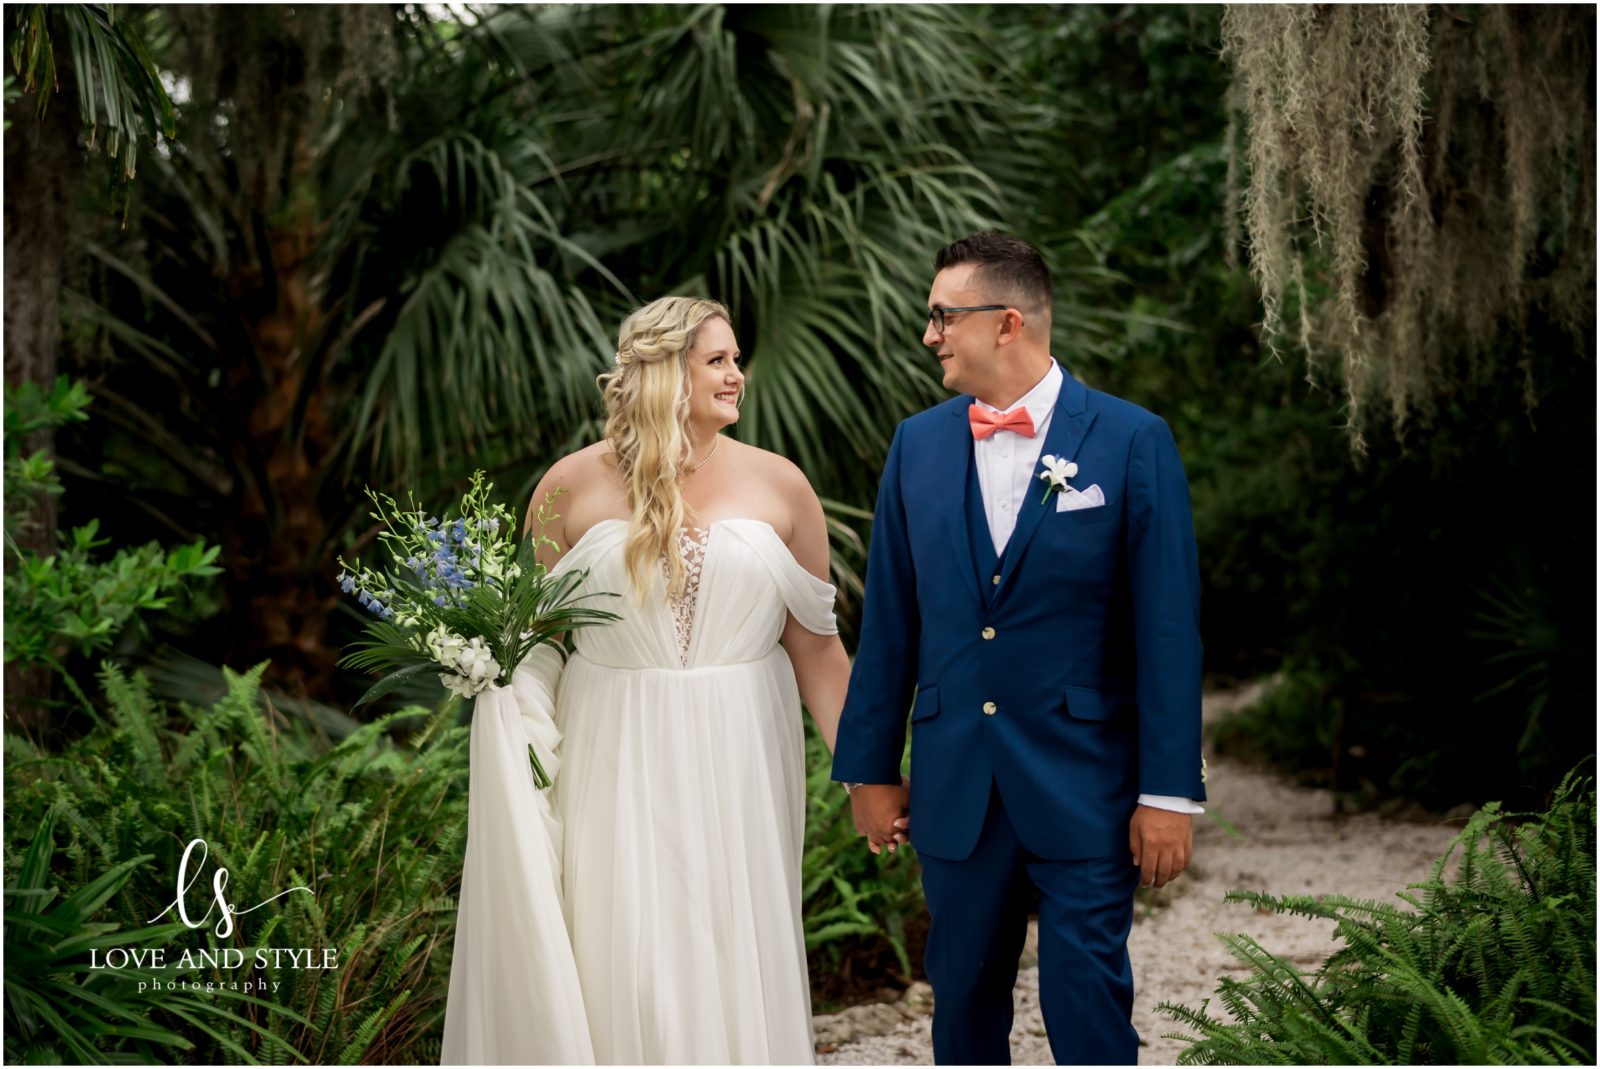 Bride and groom portrait in the bamboo garden before their Wedding at Selby Gardens Sarasota